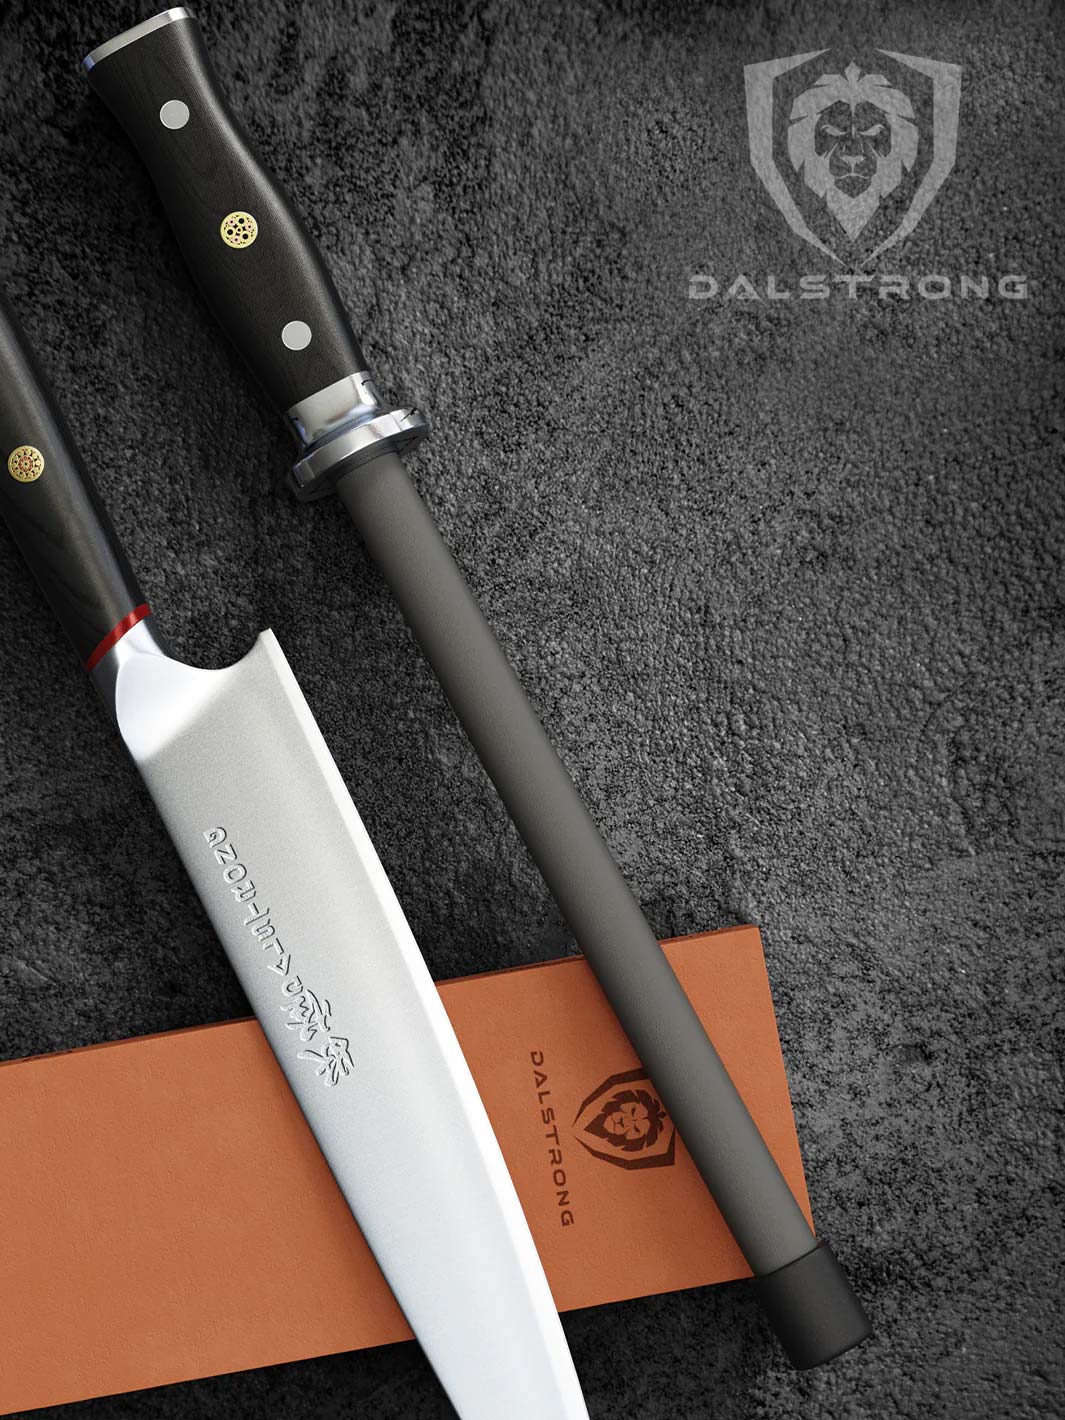 Dalstrong 10 inch honing rod with ceramic coating with a dalstrong knife beside it.